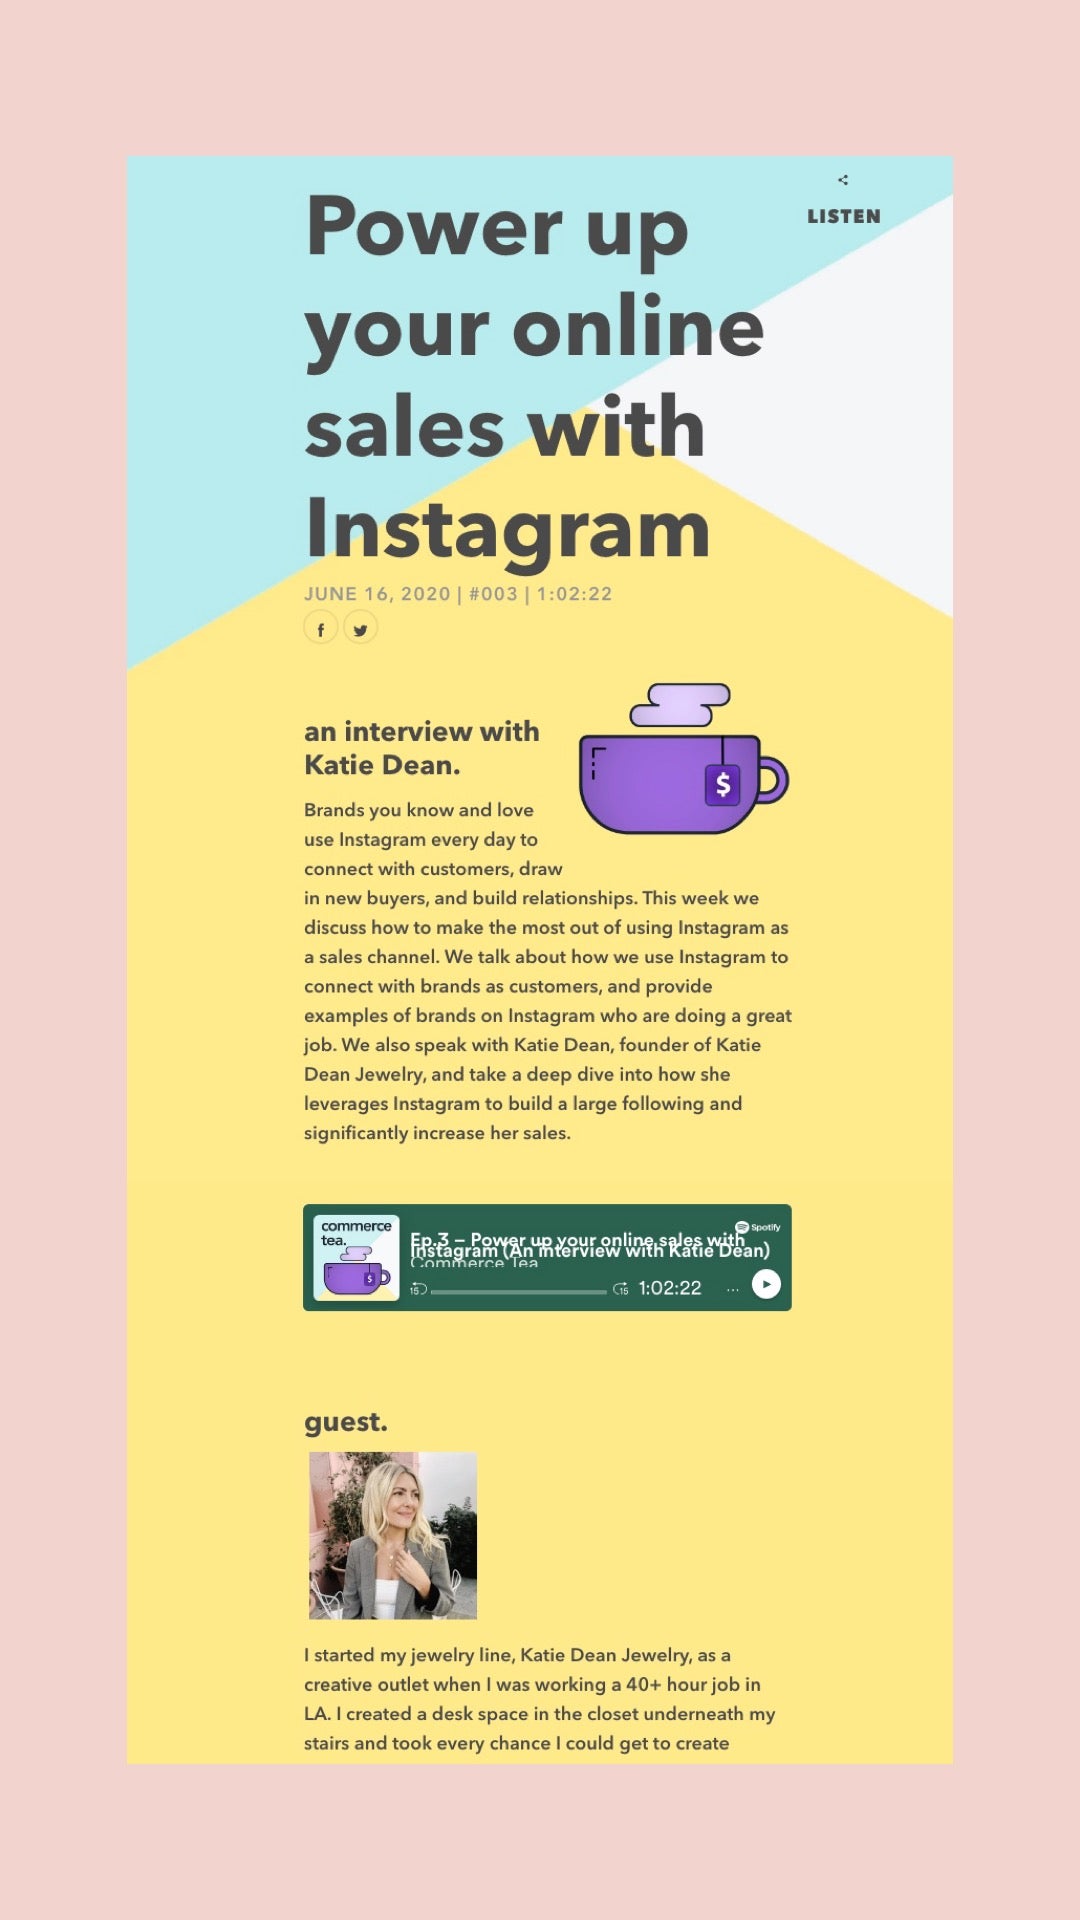 Image showing the Commerce Tea Podcast icon and text of the power-up-your-online-sales-with-instagram podcast interview with Katie Dean